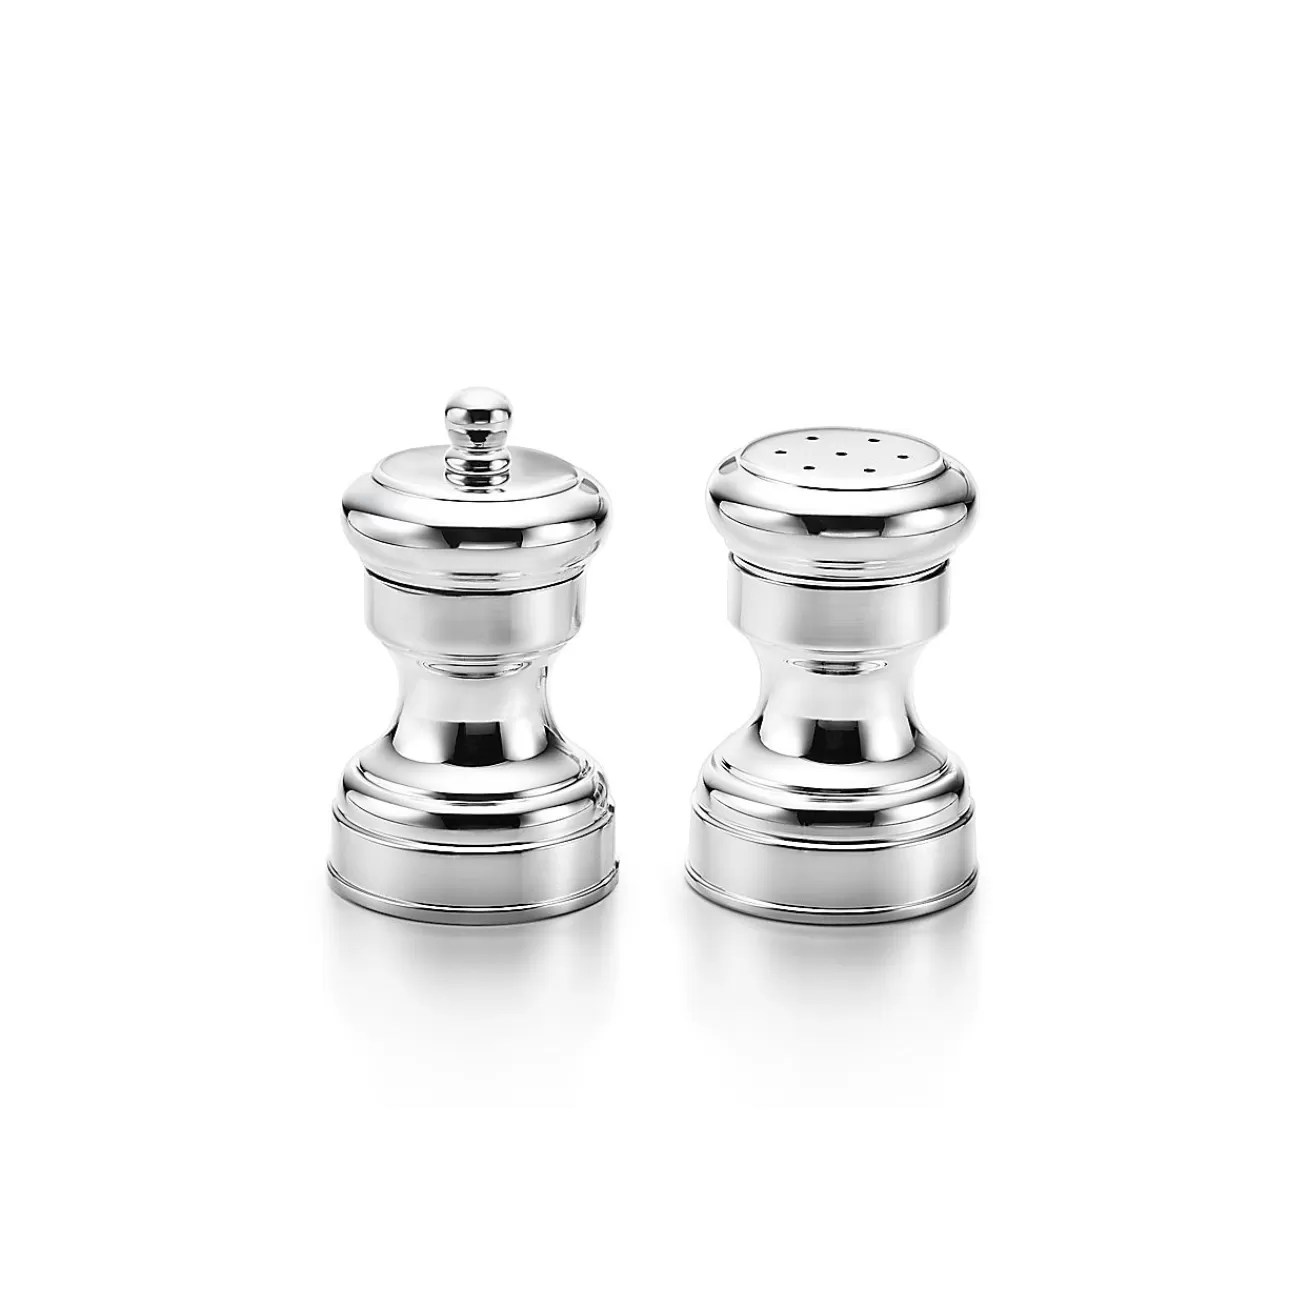 Tiffany & Co. Capstan salt and pepper shakers in sterling silver. | ^ The Couple | Wedding Gifts